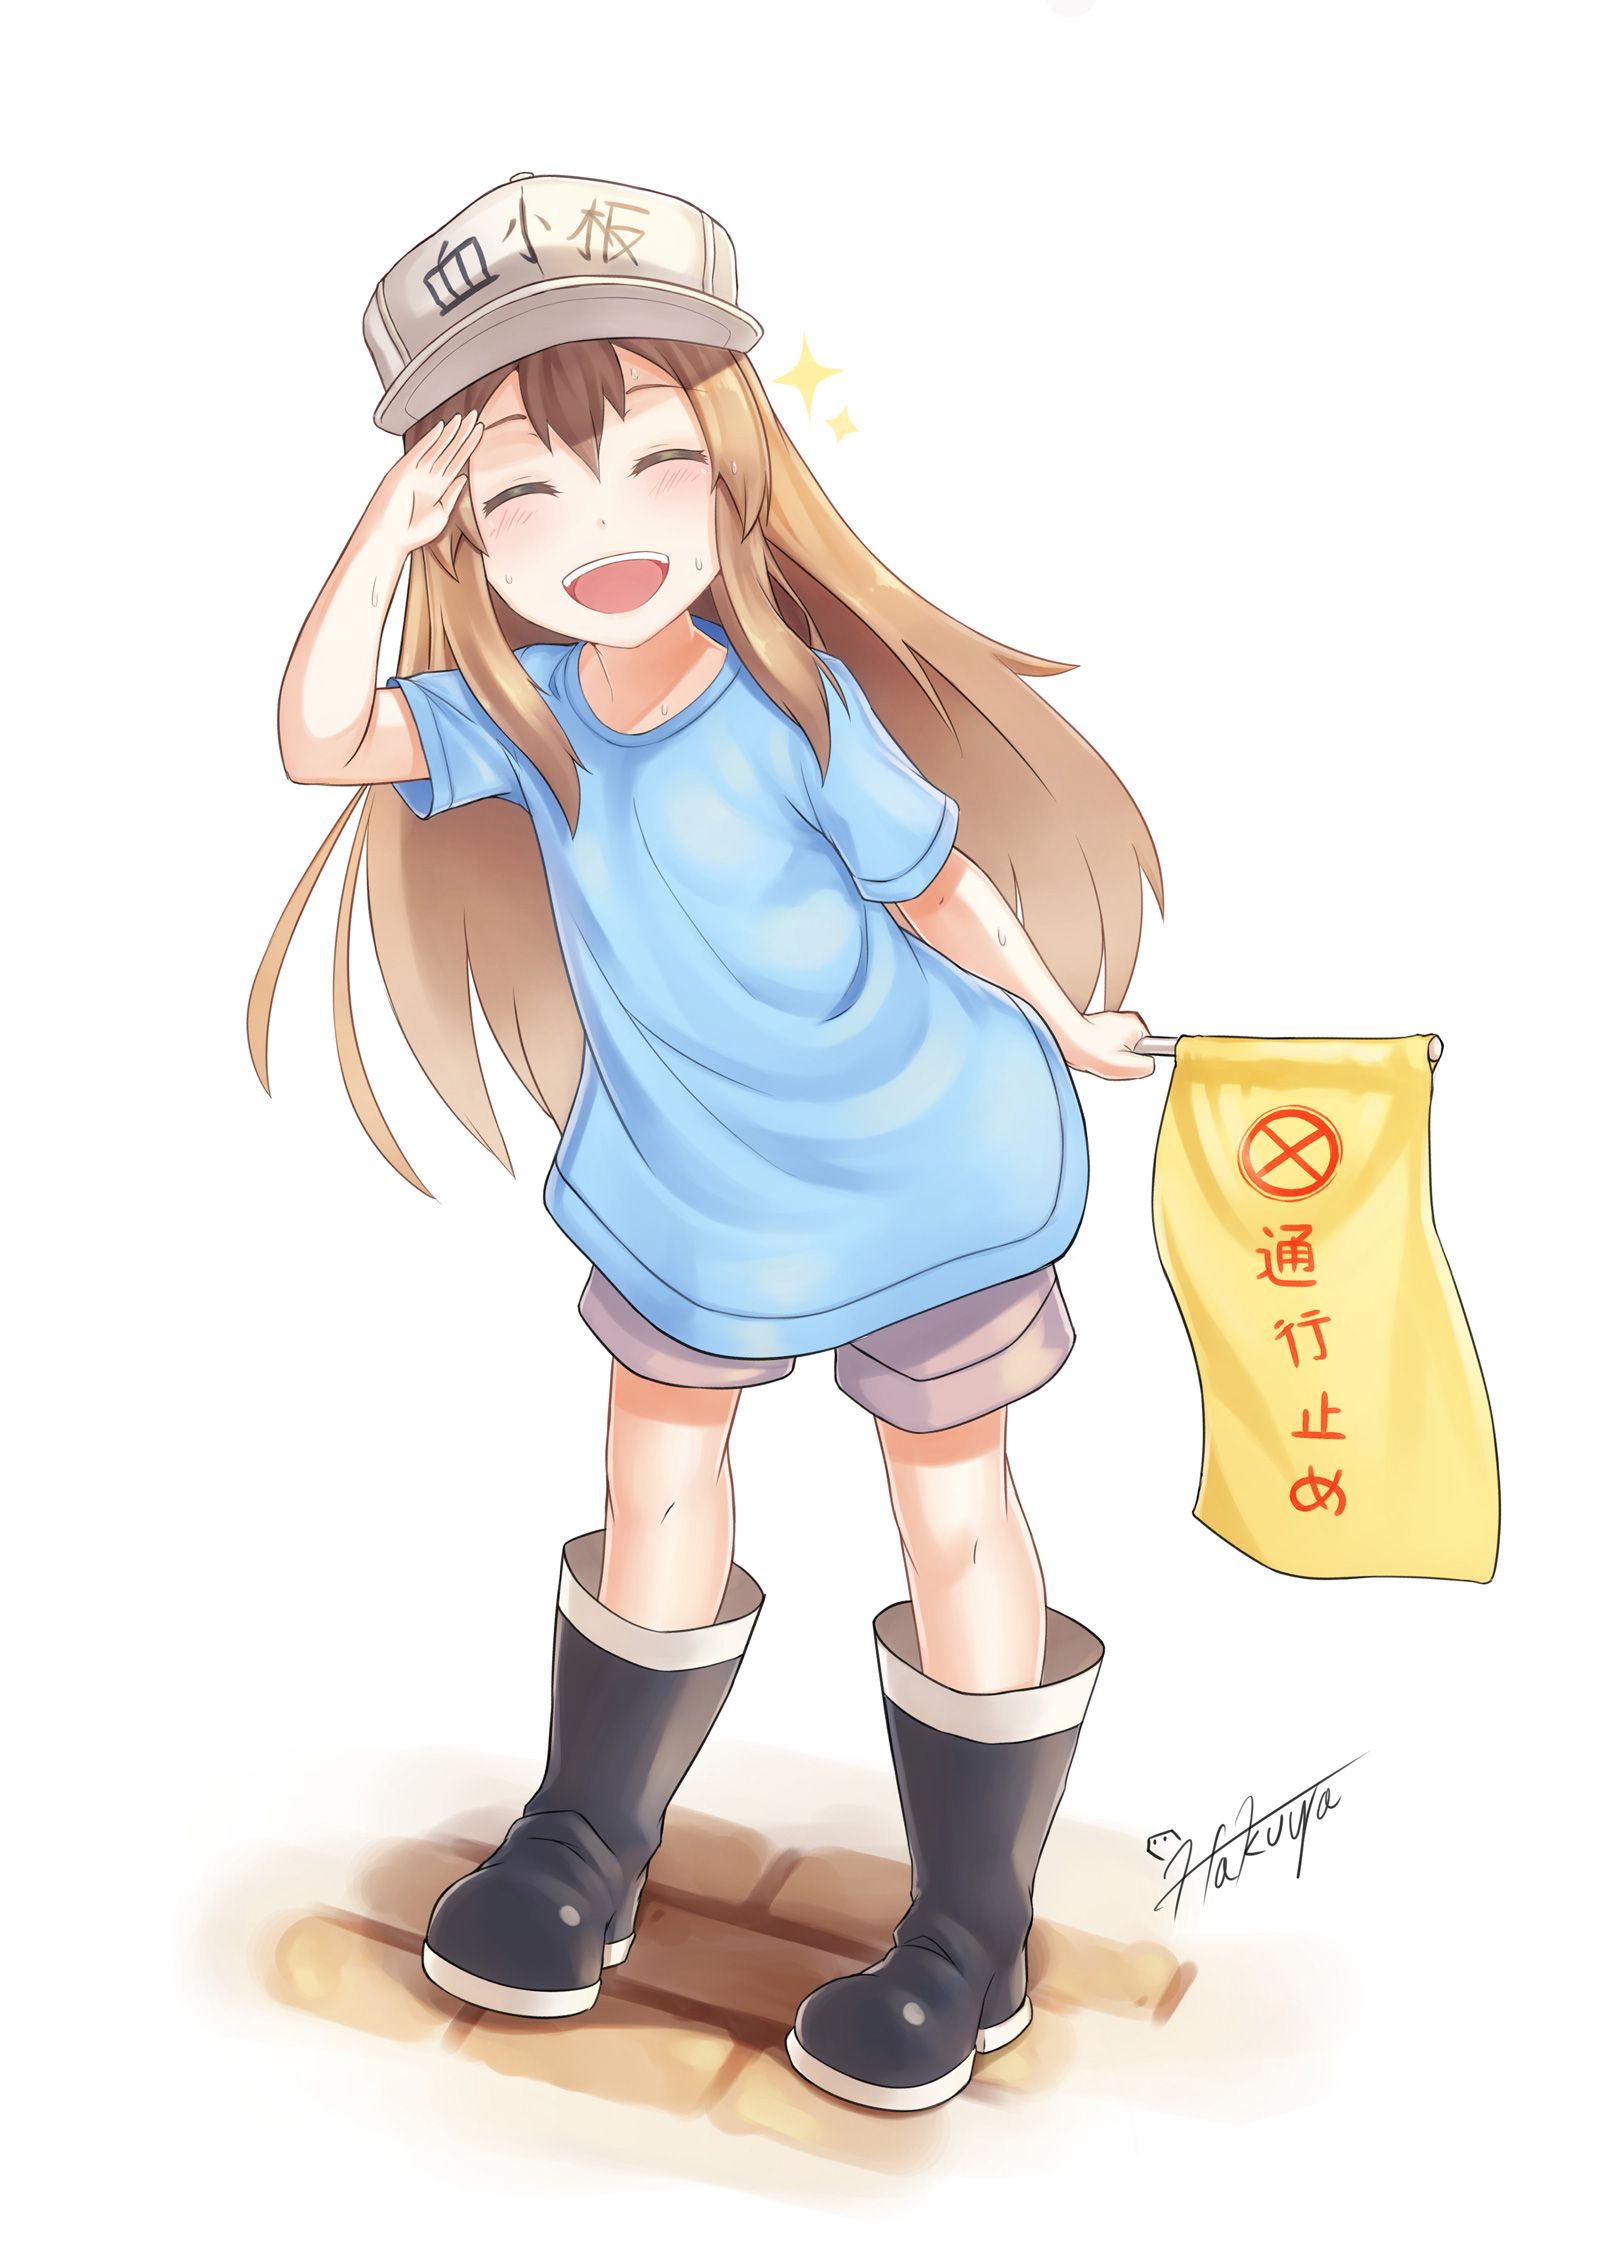 [Working cells] secondary images of platelets 1 60 sheets [ero/non-erotic] 21